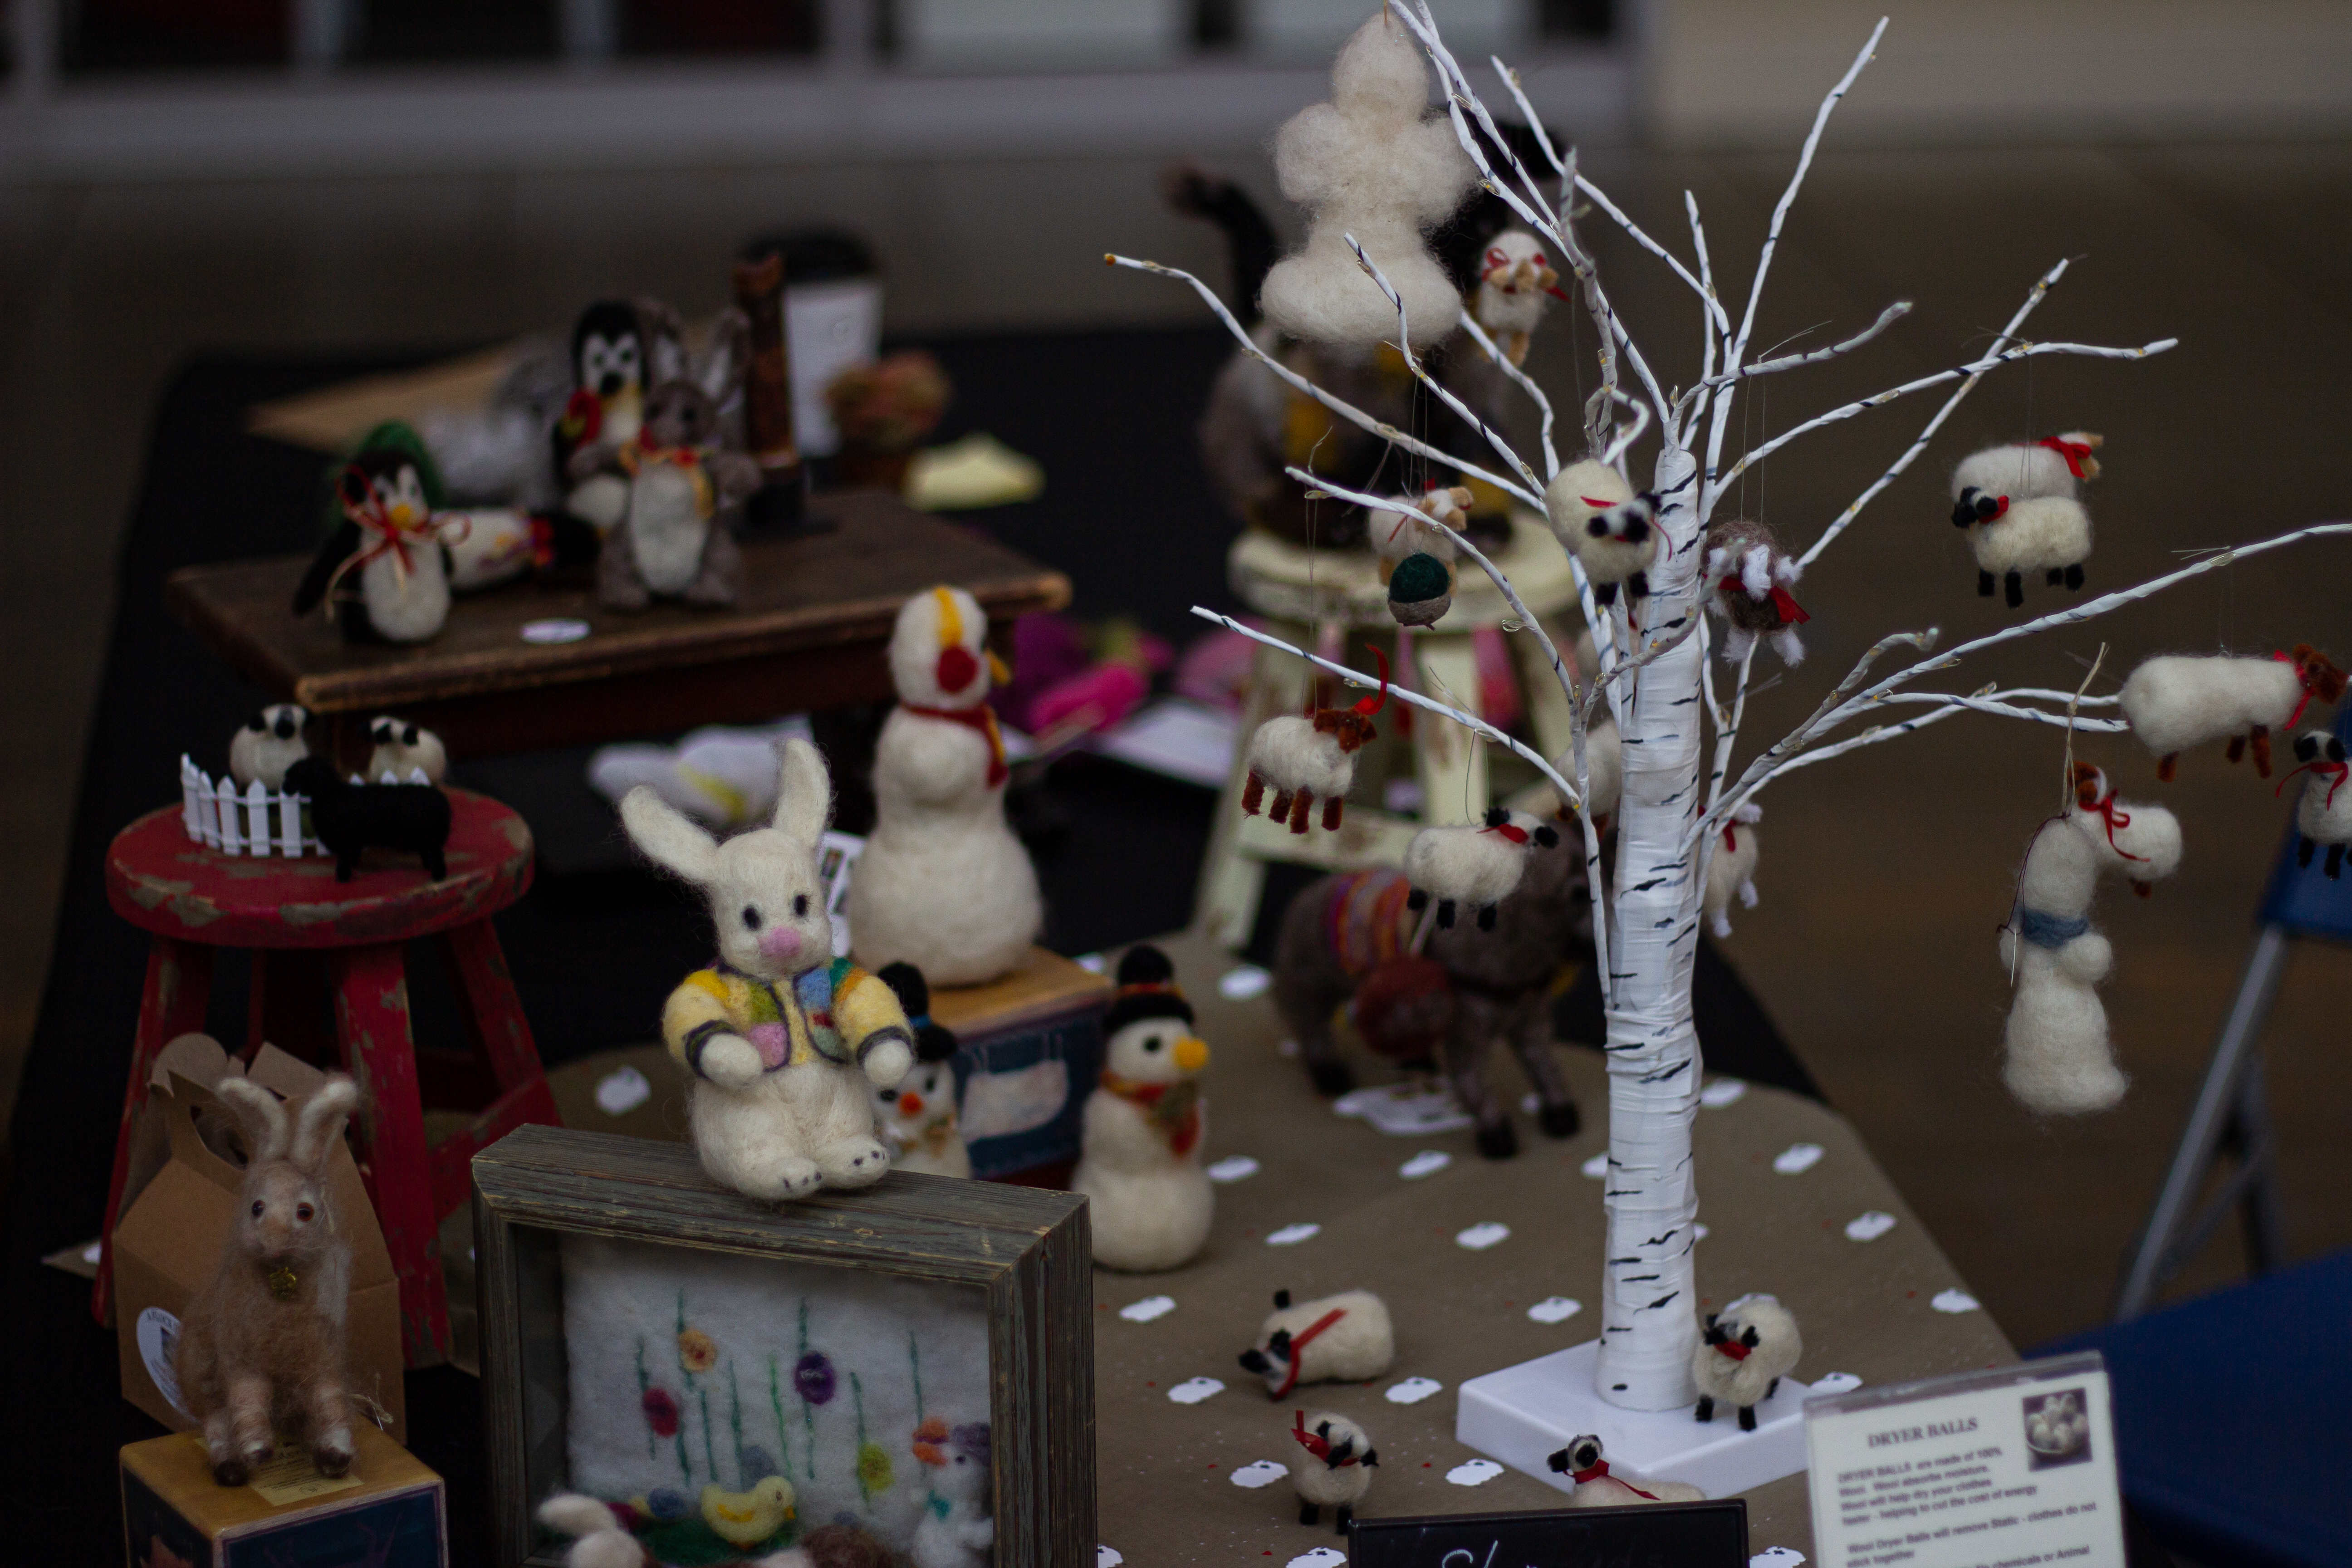 A closer look at the handmade items of Joellyn Cobb. In view is a donkey, bunnies, sheep, snowmen, and penguins. Photo by Jorge Murga.